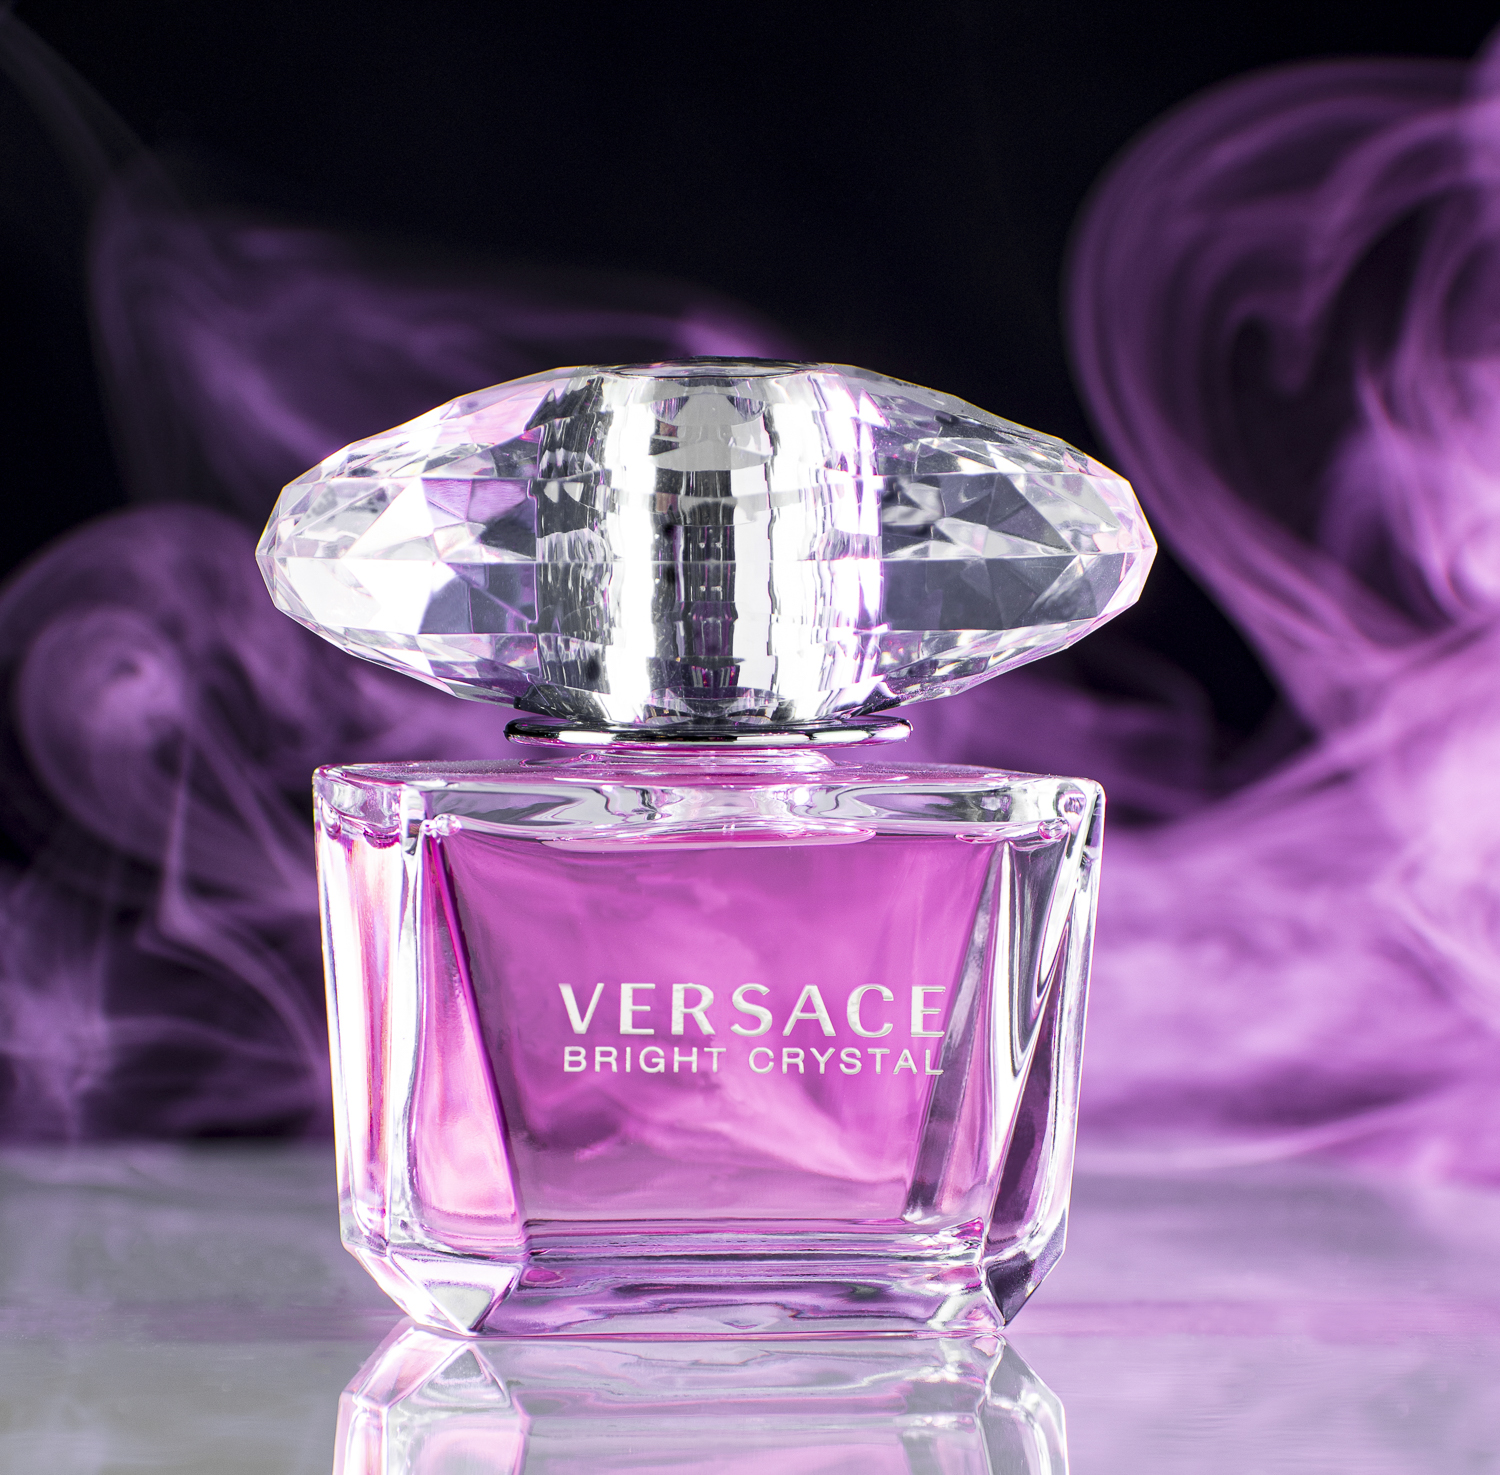 Versace Bright Crystal by Kevin Cady